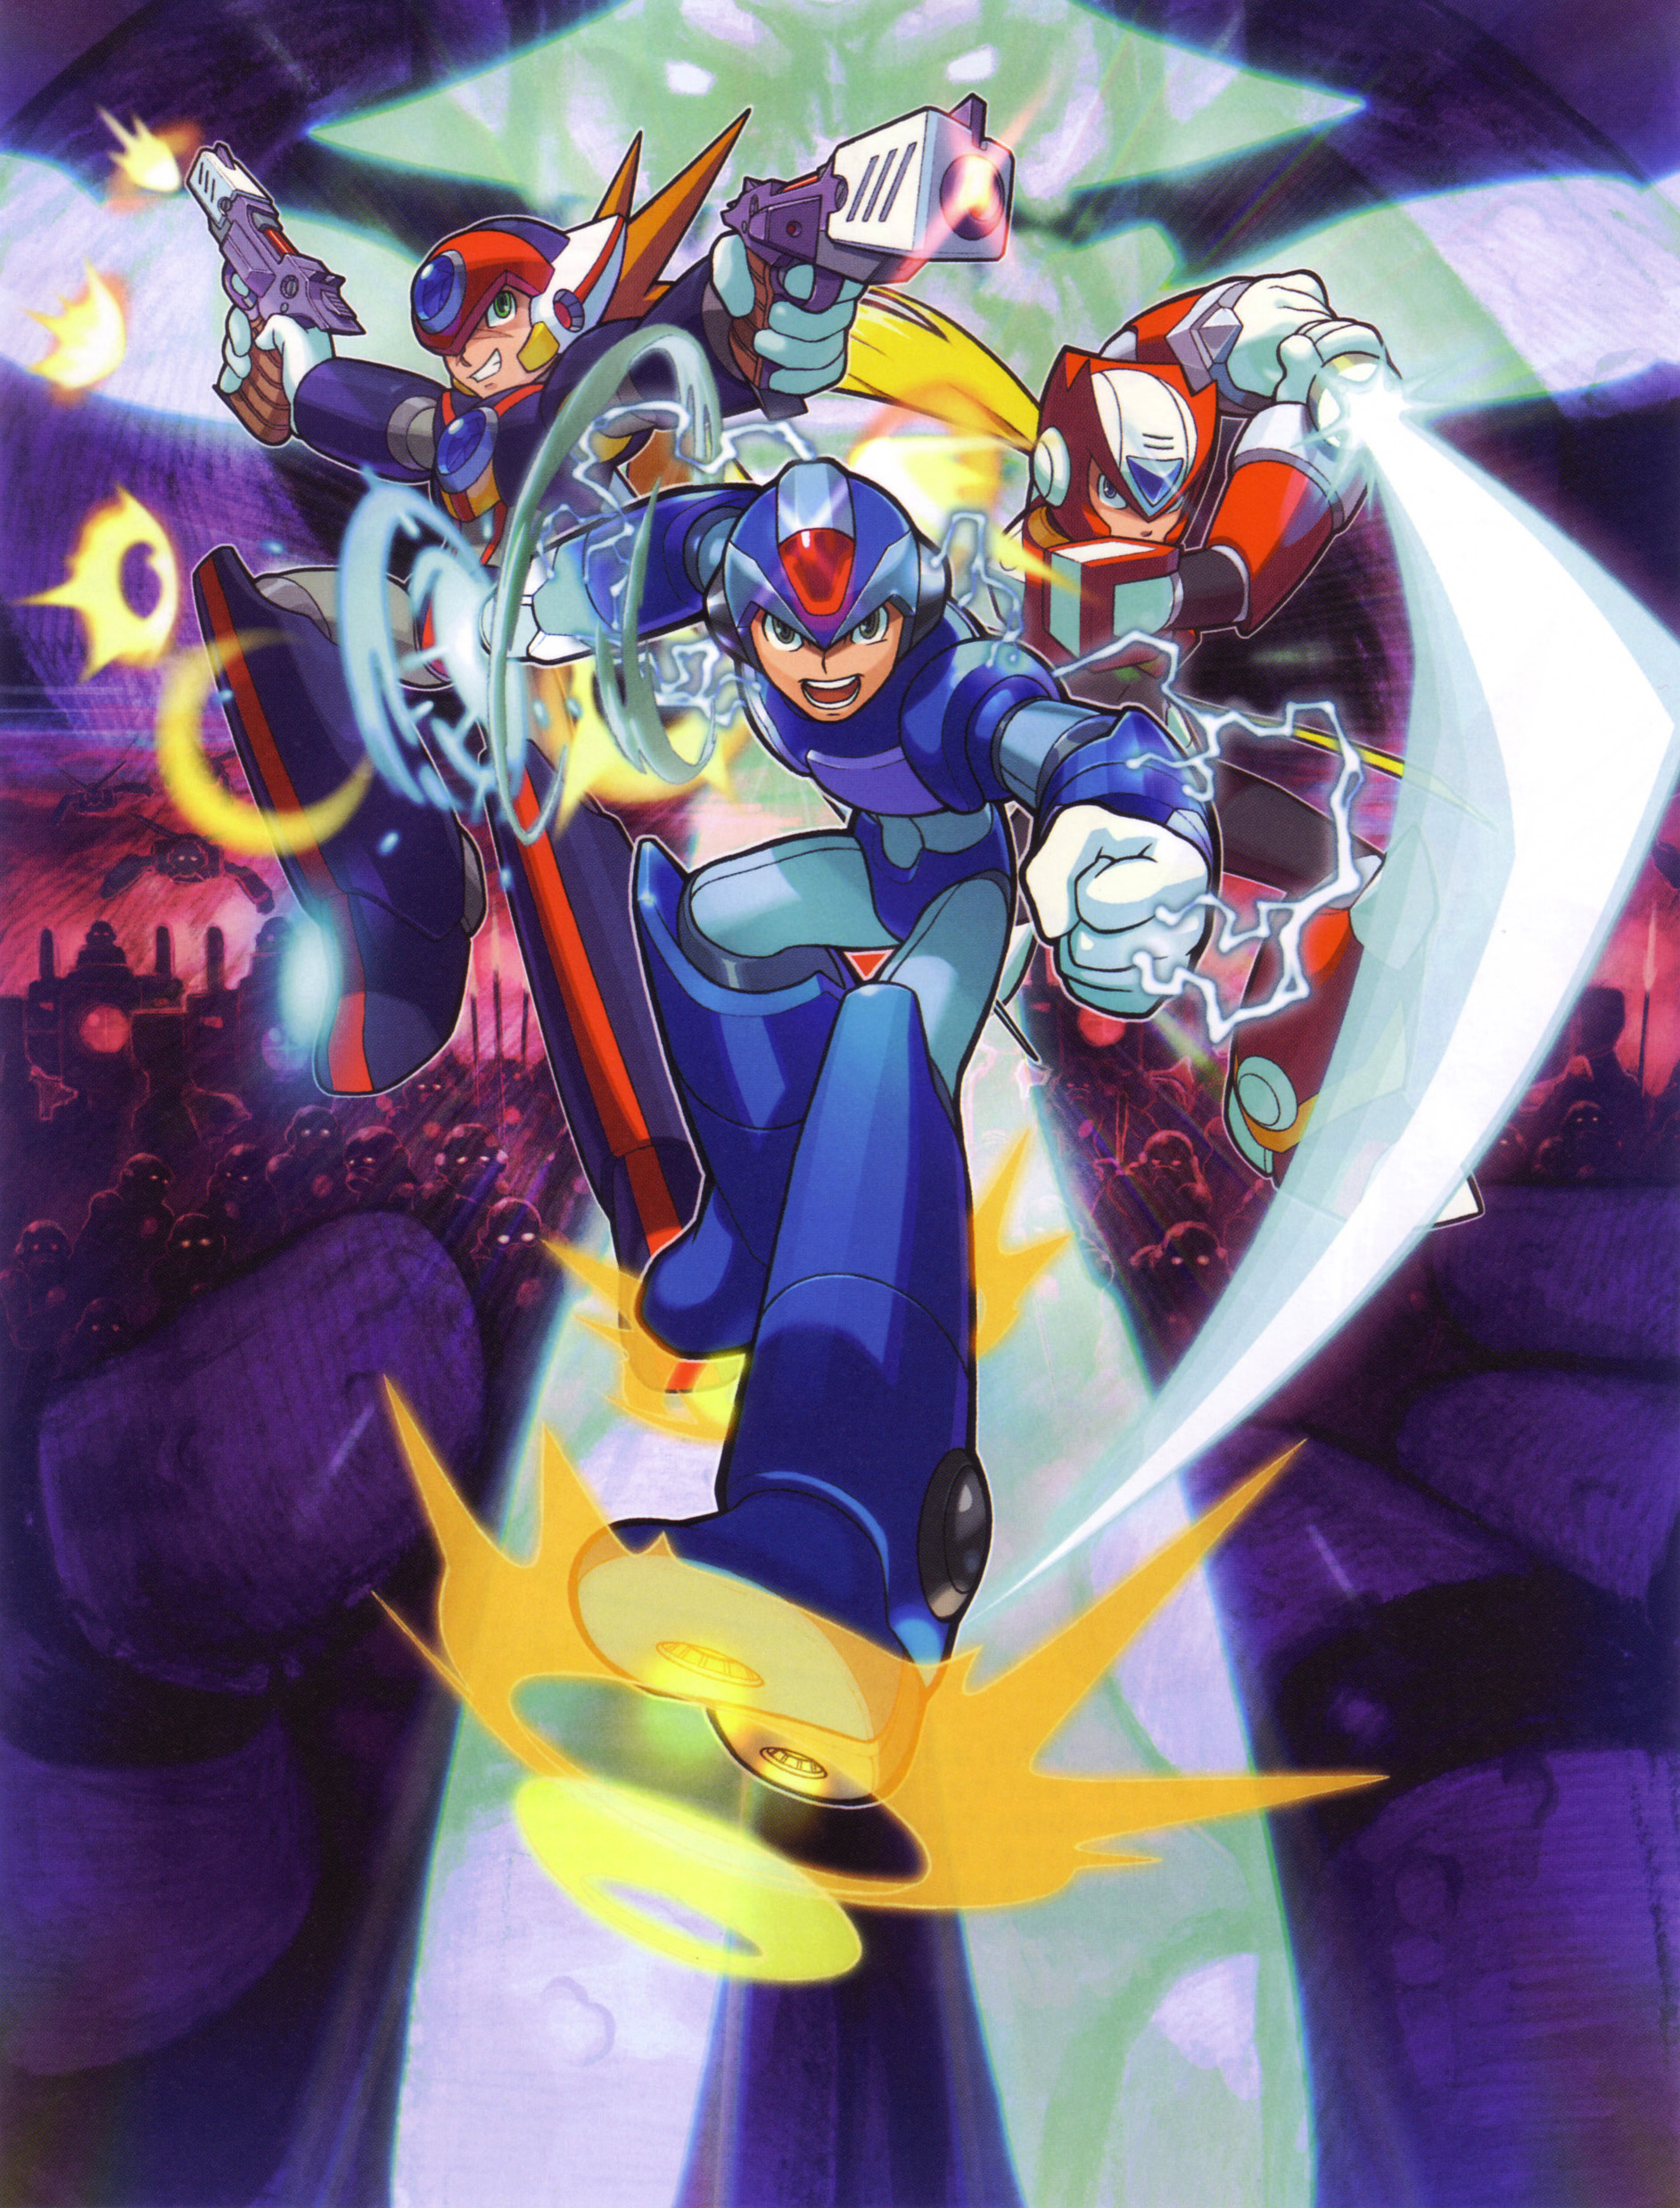 http://images2.wikia.nocookie.net/__cb20100704063037/megaman/images/2/28/MMX8Promo.jpg